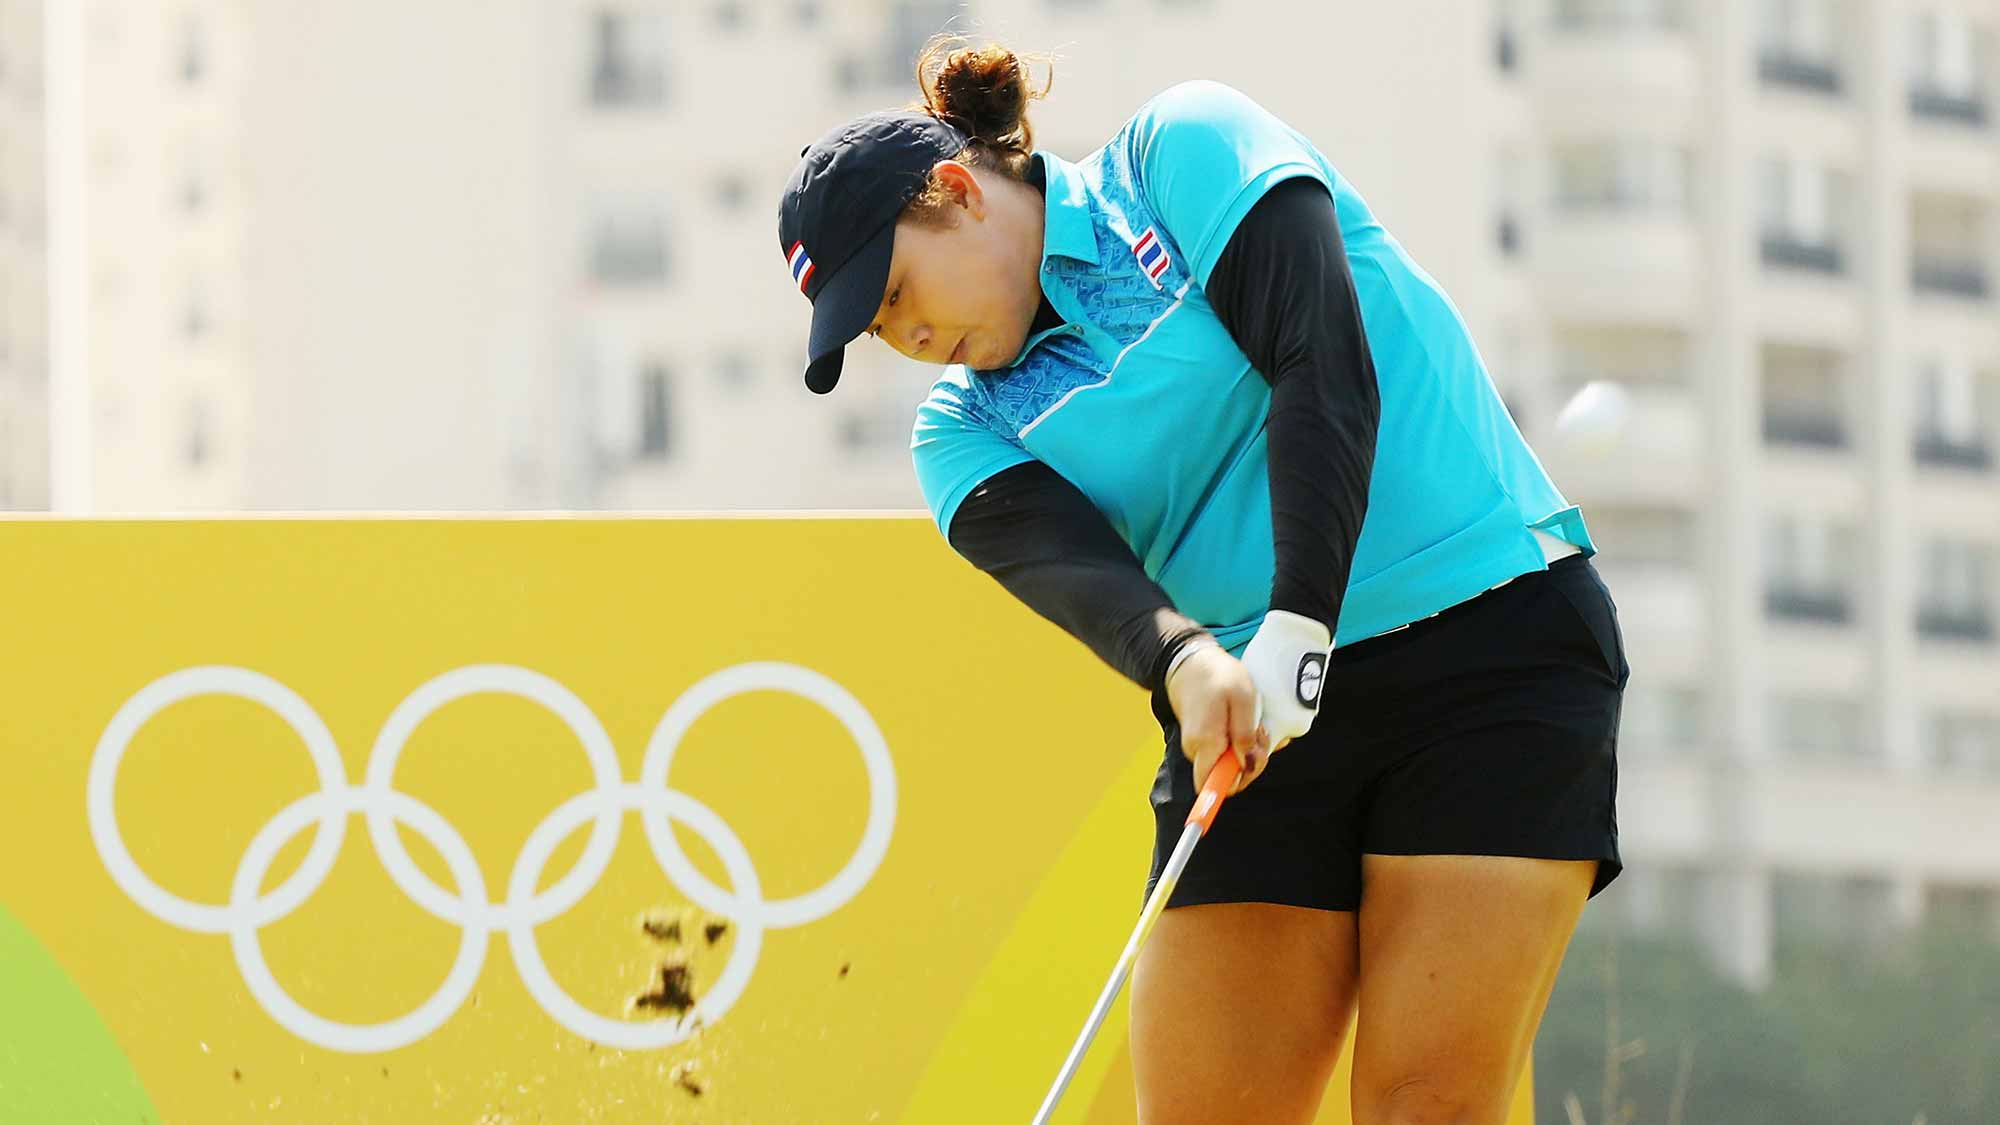 Ariya Jutanugarn of Thailand hits her tee shot on the eighth hole during the second round of the Women's Individual Stroke Play golf on Day 13 of the Rio 2016 Olympic Games at Olympic Golf Course